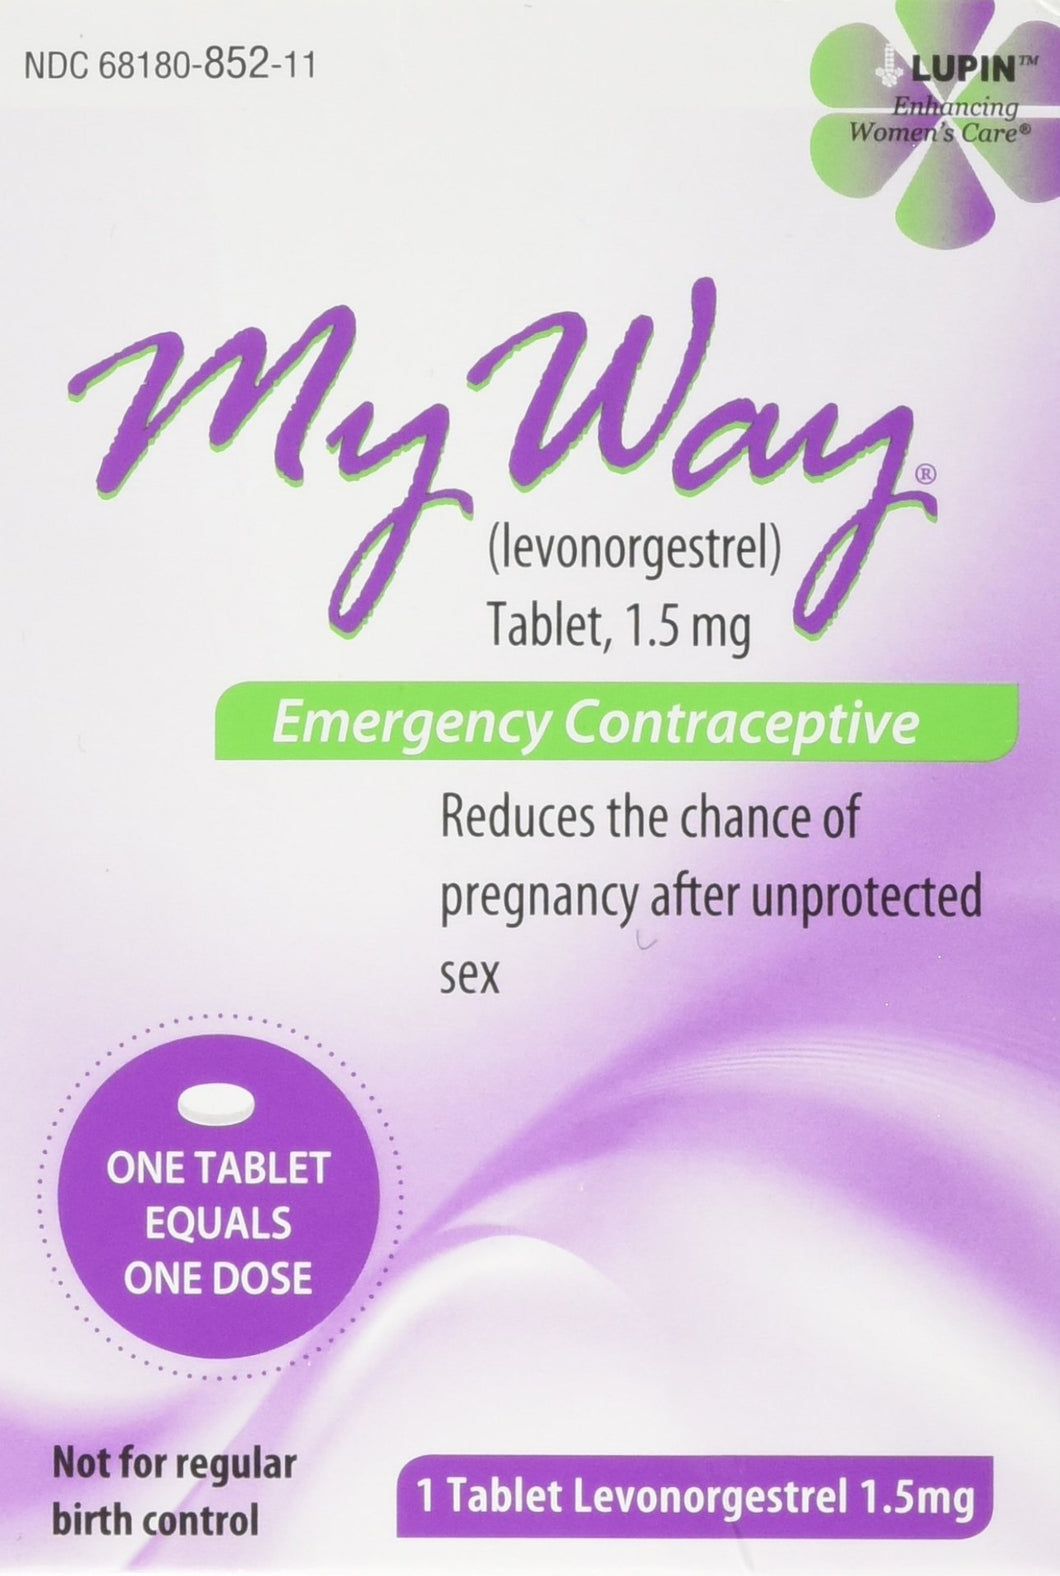 My Way Emergency Contraceptive 1 Tablet *Compare to Plan B One-Step*